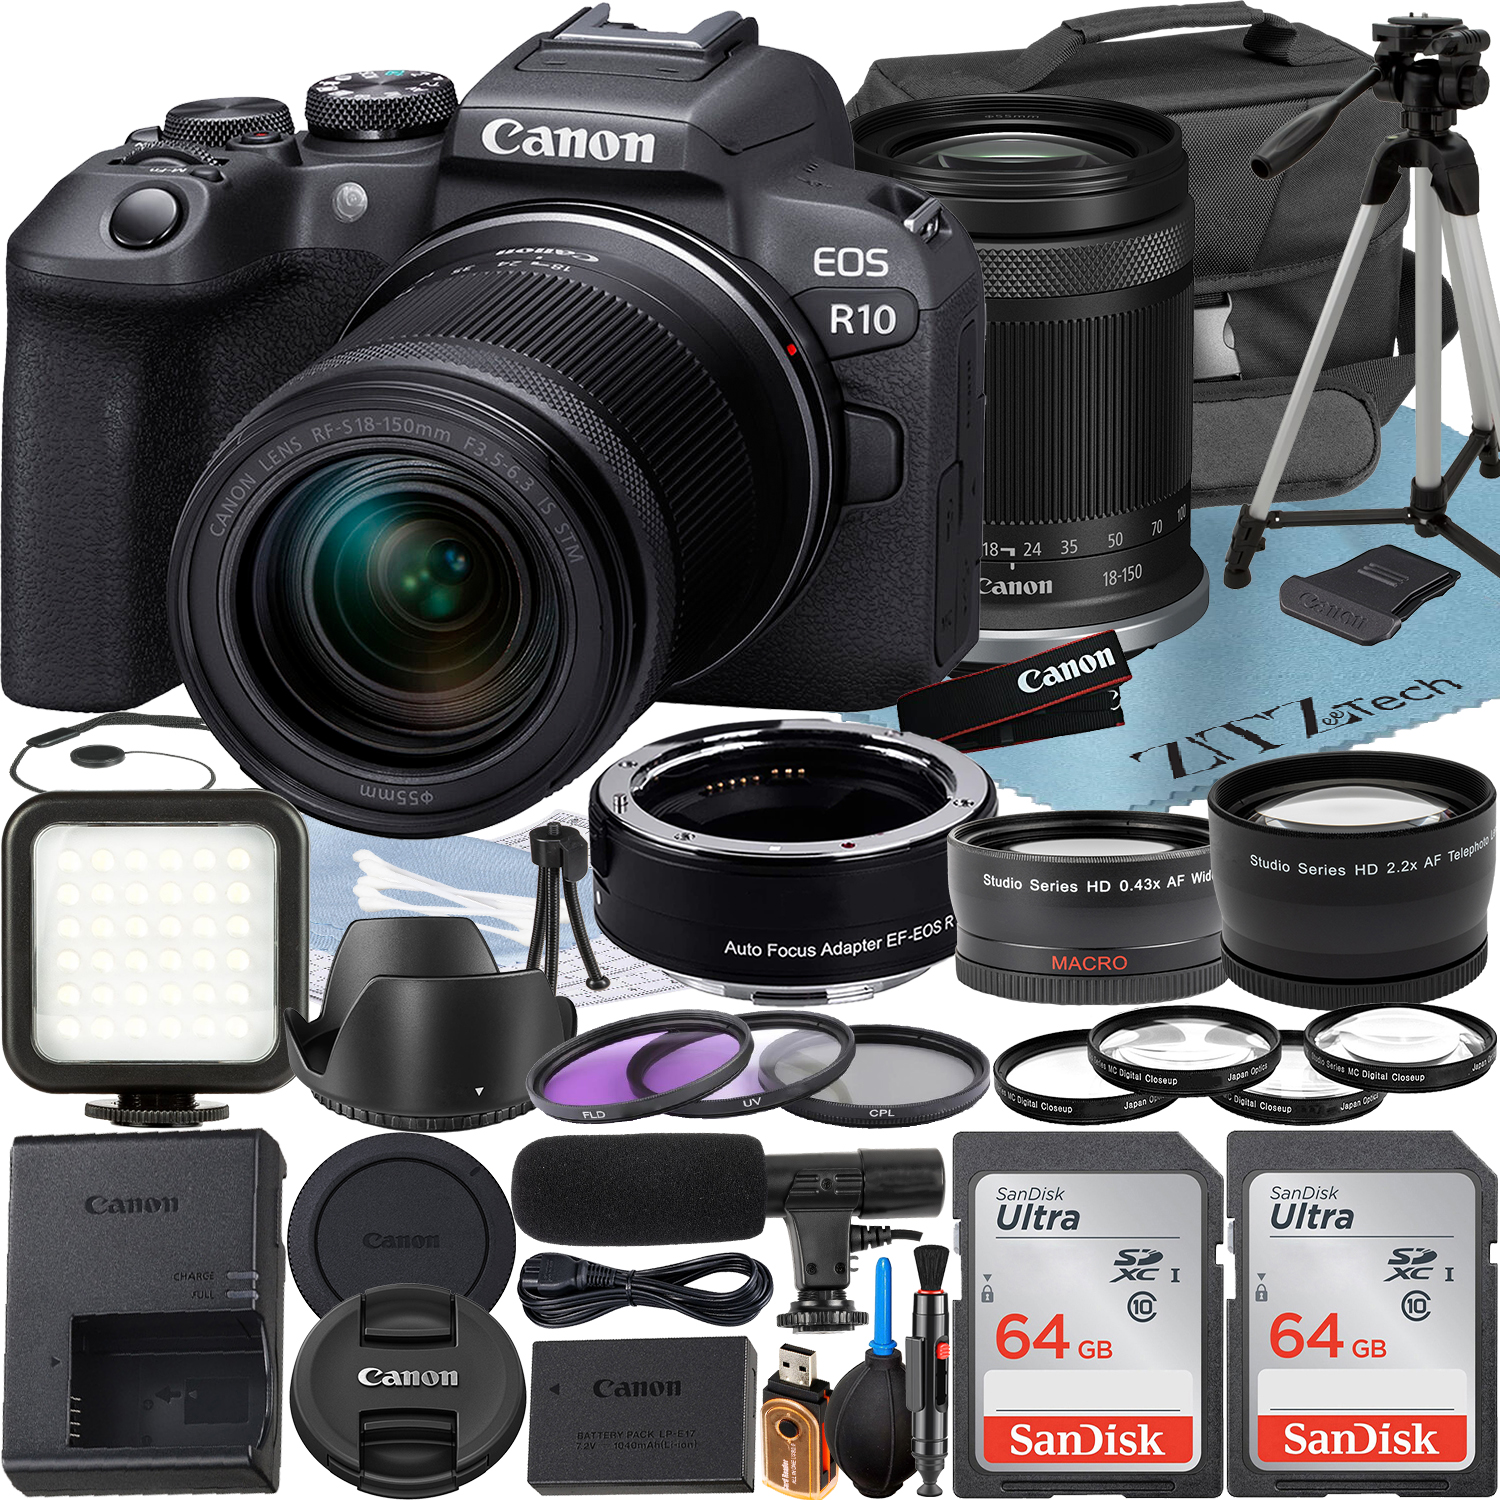 Canon EOS R10 Mirrorless Camera with RF-S 18-150mm Lens + Mount Adapter + 2 Pack SanDisk 64GB Memory Card + Case + ZeeTech Accessory